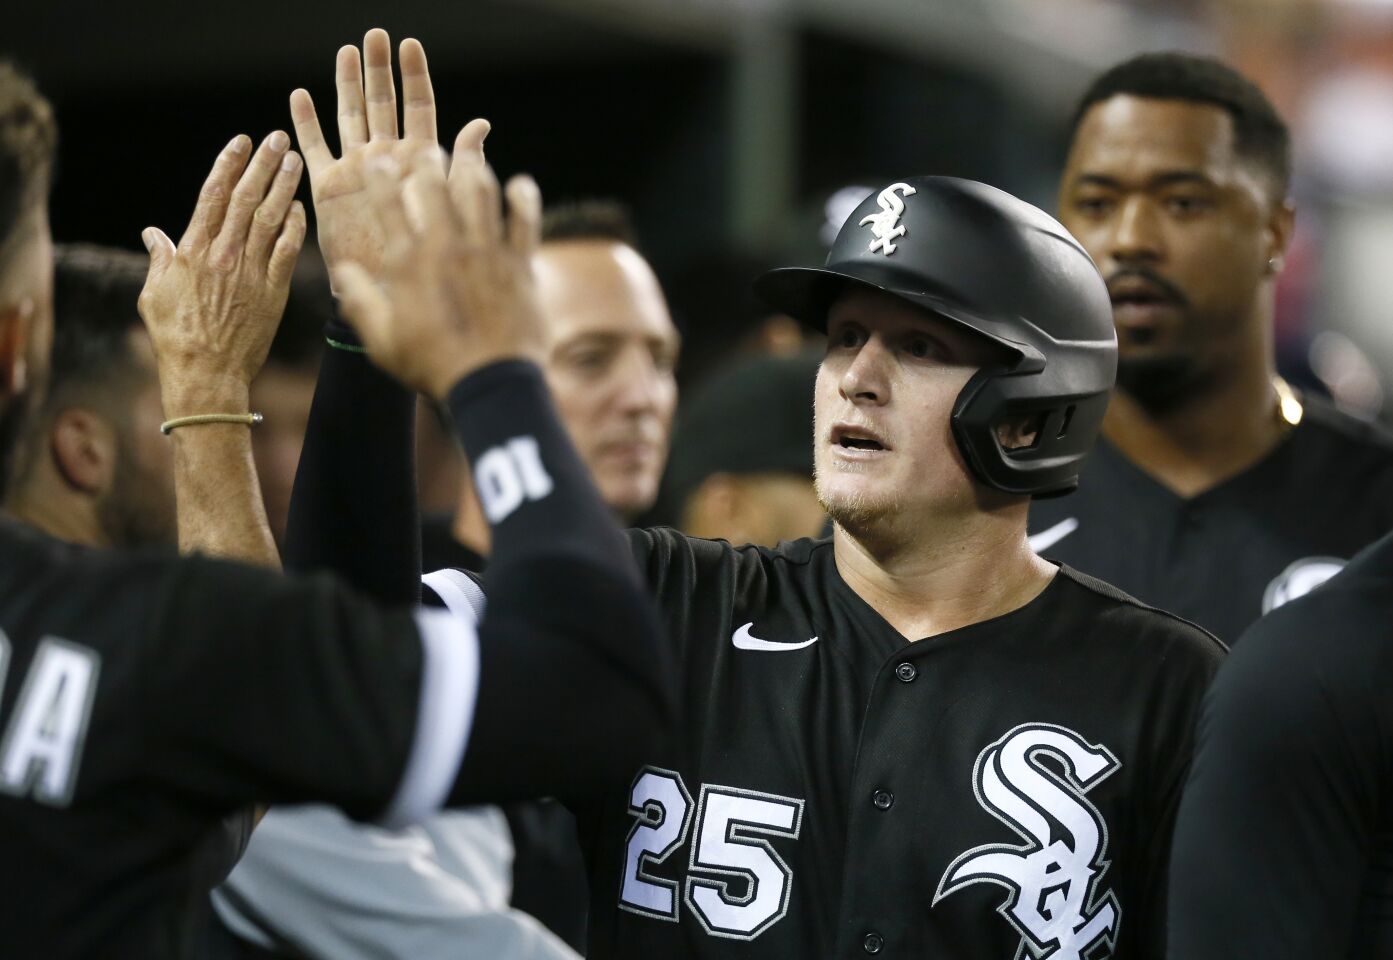 Trending: ChicagoFor all the names on the White Sox roster, it is OF Andrew Vaughn (pictured) leading the team with 17 homers, not 1B Jose Abreu, DH Eloy Jimenez (15) or injured 3B Yoan Moncada (12) and OF Luis Robert (12). Jimenez, however, is coming on strong with seven homers and 22 RBIs over his last 25 games (.917 OPS). SS Elvis Andrus is hitting .266/.301/.424 with six homers and 22 RBIs in 37 games since leaving behind the A’s for the White Sox. In the bullpen, RHP Liam Hendriks (3.02 ERA), Bob Melvin’s closer in Oakland, is 33-for-37 in save chances. LHP Aaron Bummer (2.55) and RHP Reynaldo Lopez (2.84) are the only relievers with ERAs under 3.00.